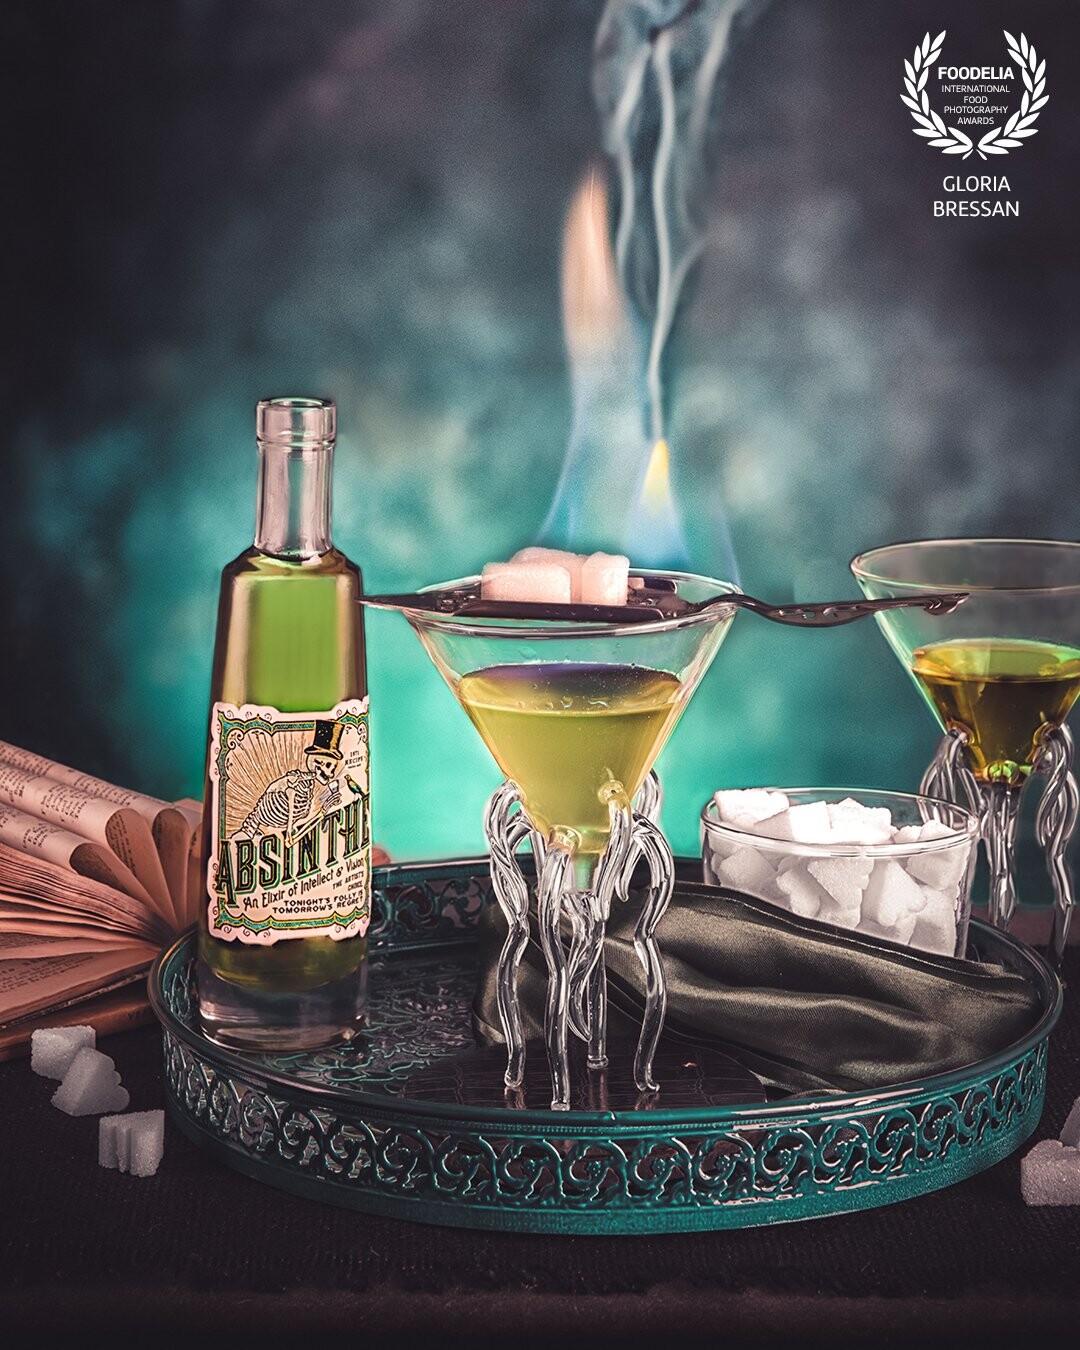 Historical account of a picture. In the last century, Absinthe was considered the liqueur of the damned poets, addicted to drugs and the intoxication of a psychotic ingredient contained in the Artemisia distillate. He called himself the "green fairy" because he was believed to cause hallucinations and for this he was banned from the trade. It was preferably consumed after 5 in the afternoon, until 7, in what began to be called "the green hour". To drink it, it was mixed with water and served by pouring it on a sugar cube placed on a perforated teaspoon placed on the mouth of the glass, then burning the cube. It is said that Vincent van Gogh's "Starry Night" was painted under the effect of absinthe and Oscar Wilde said "" After the first glass, you see things as you wish. After the second, you see things as they are not. Finally, you see things as they really are, which is the most horrible thing in the world. "